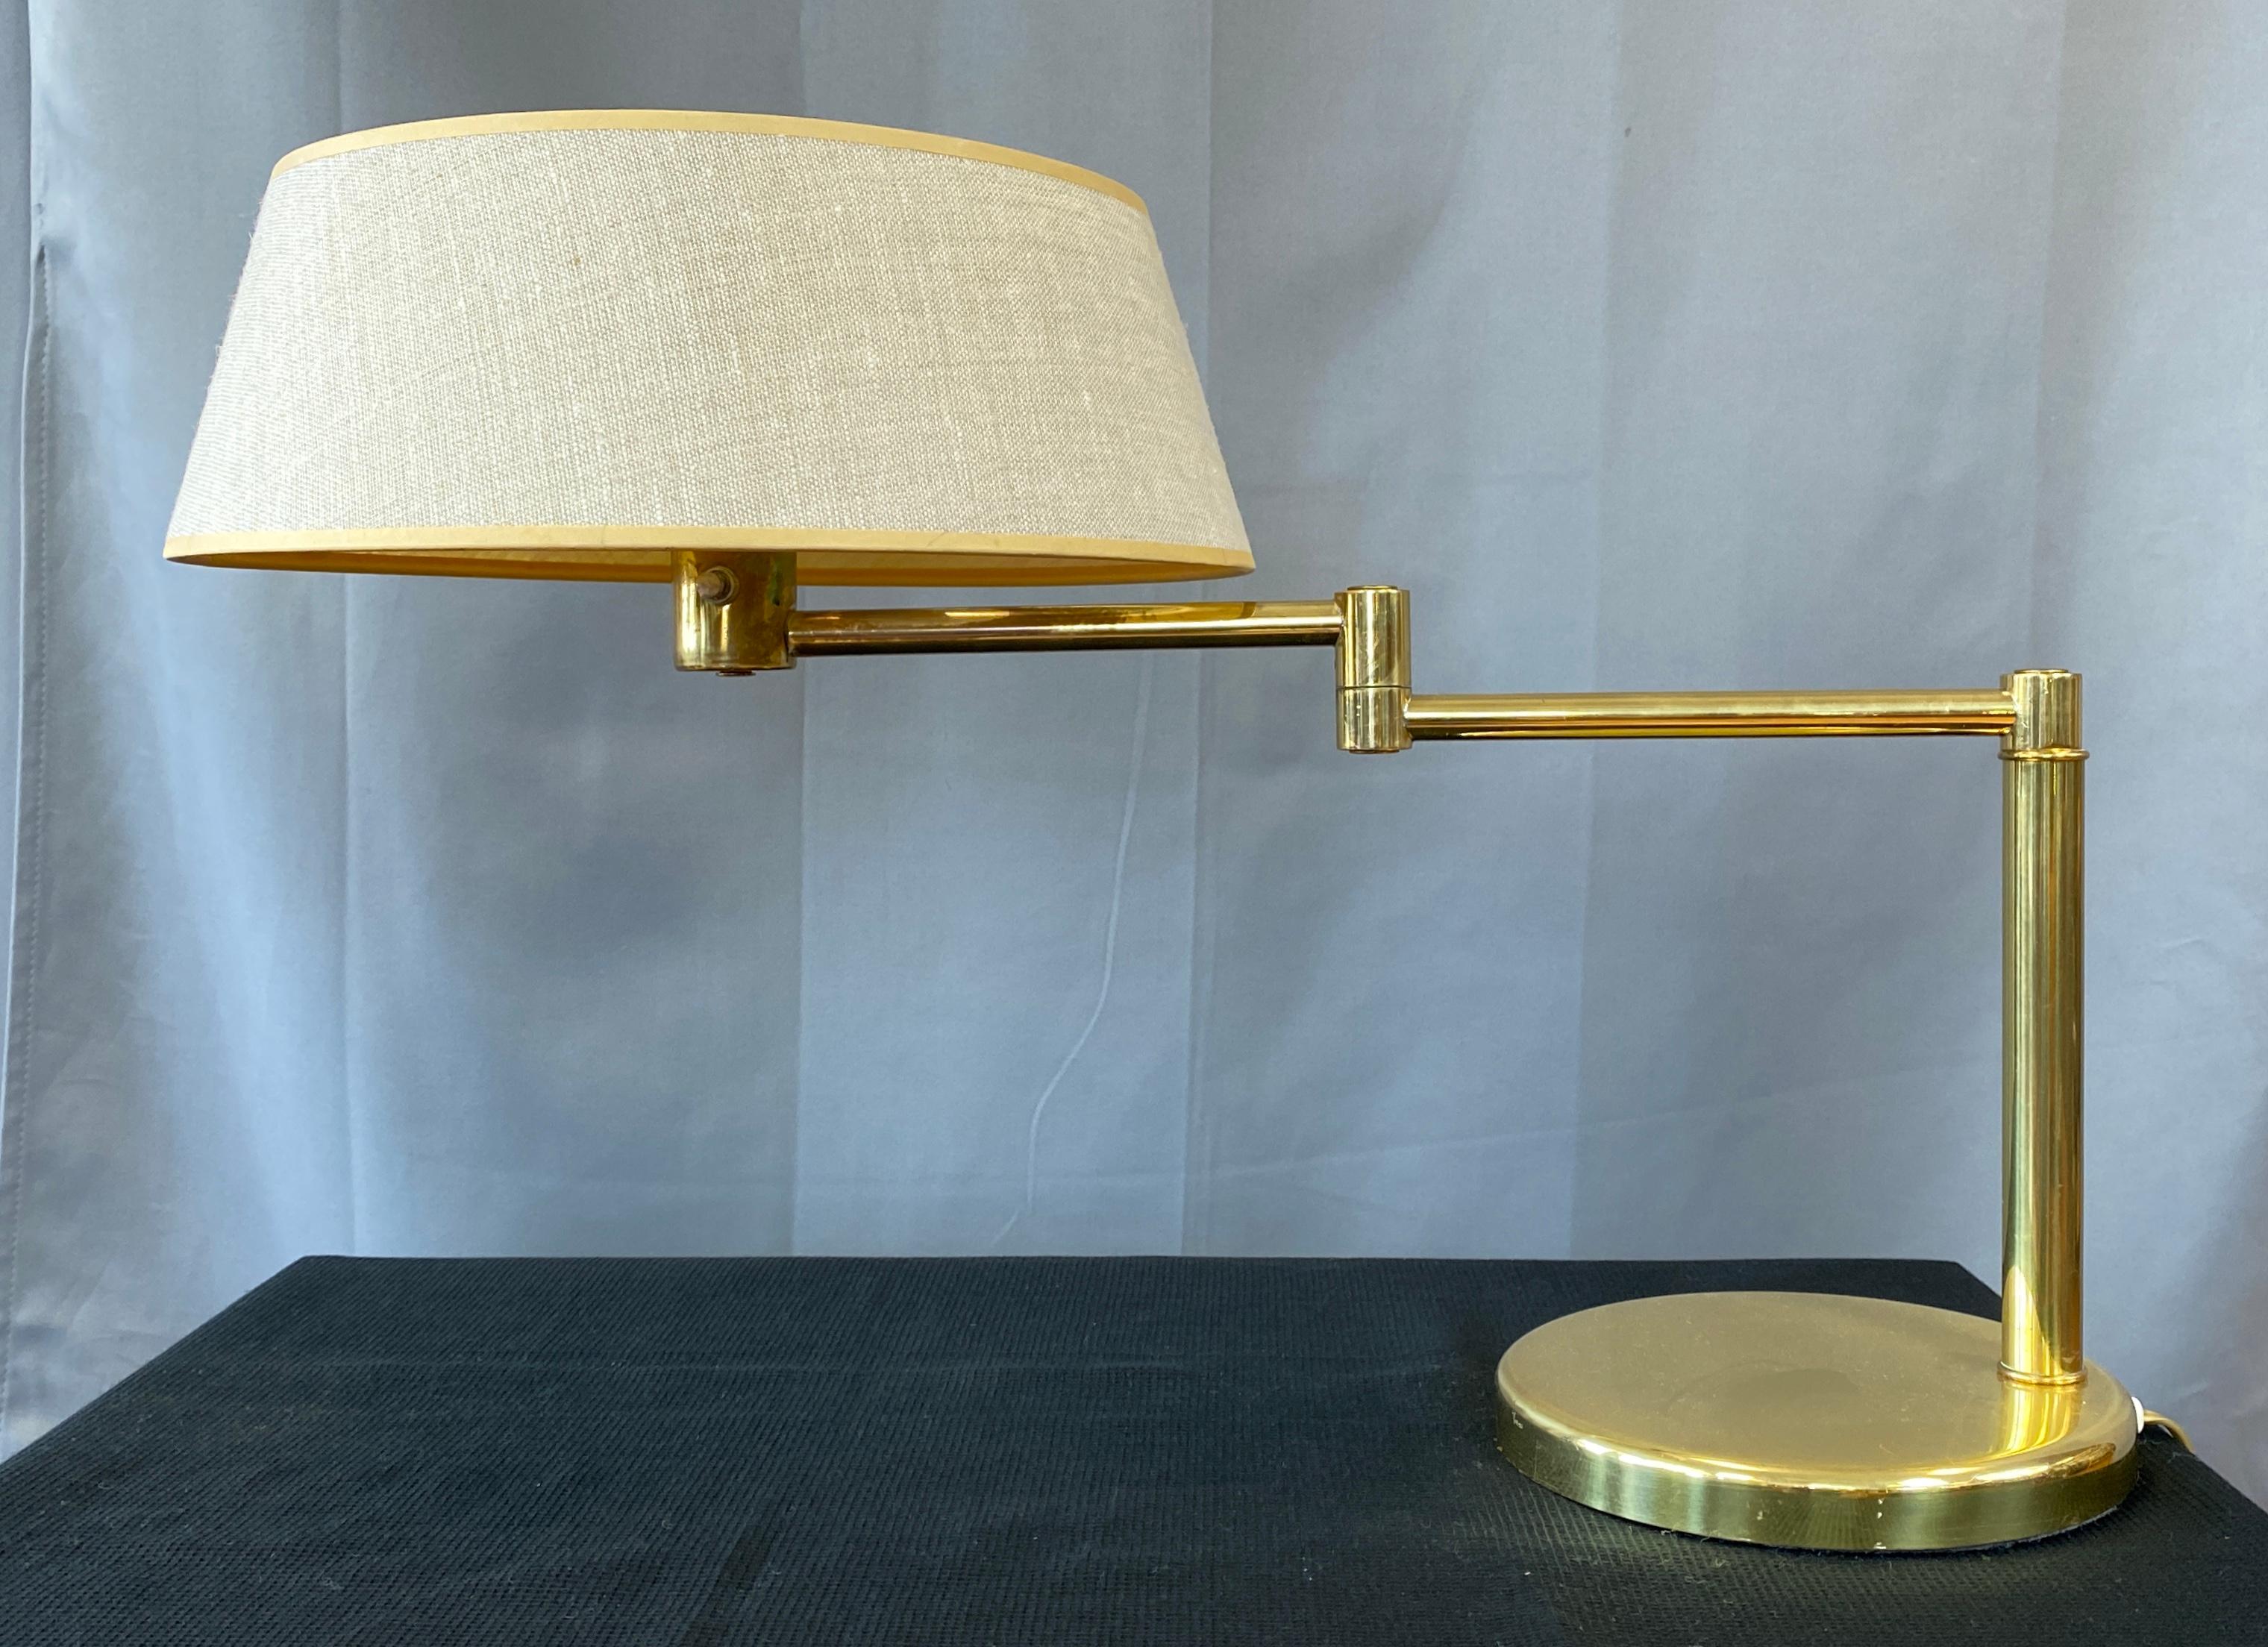 Handsome Walter Von Nessen design for Nessen lamps, circa 1970s 
A brass swing arm lamp with it's rare original shade, heavy weighted base with pole to one side,
arm stretches out, with half adjustable/swings. Nice touch, top of the shade it still